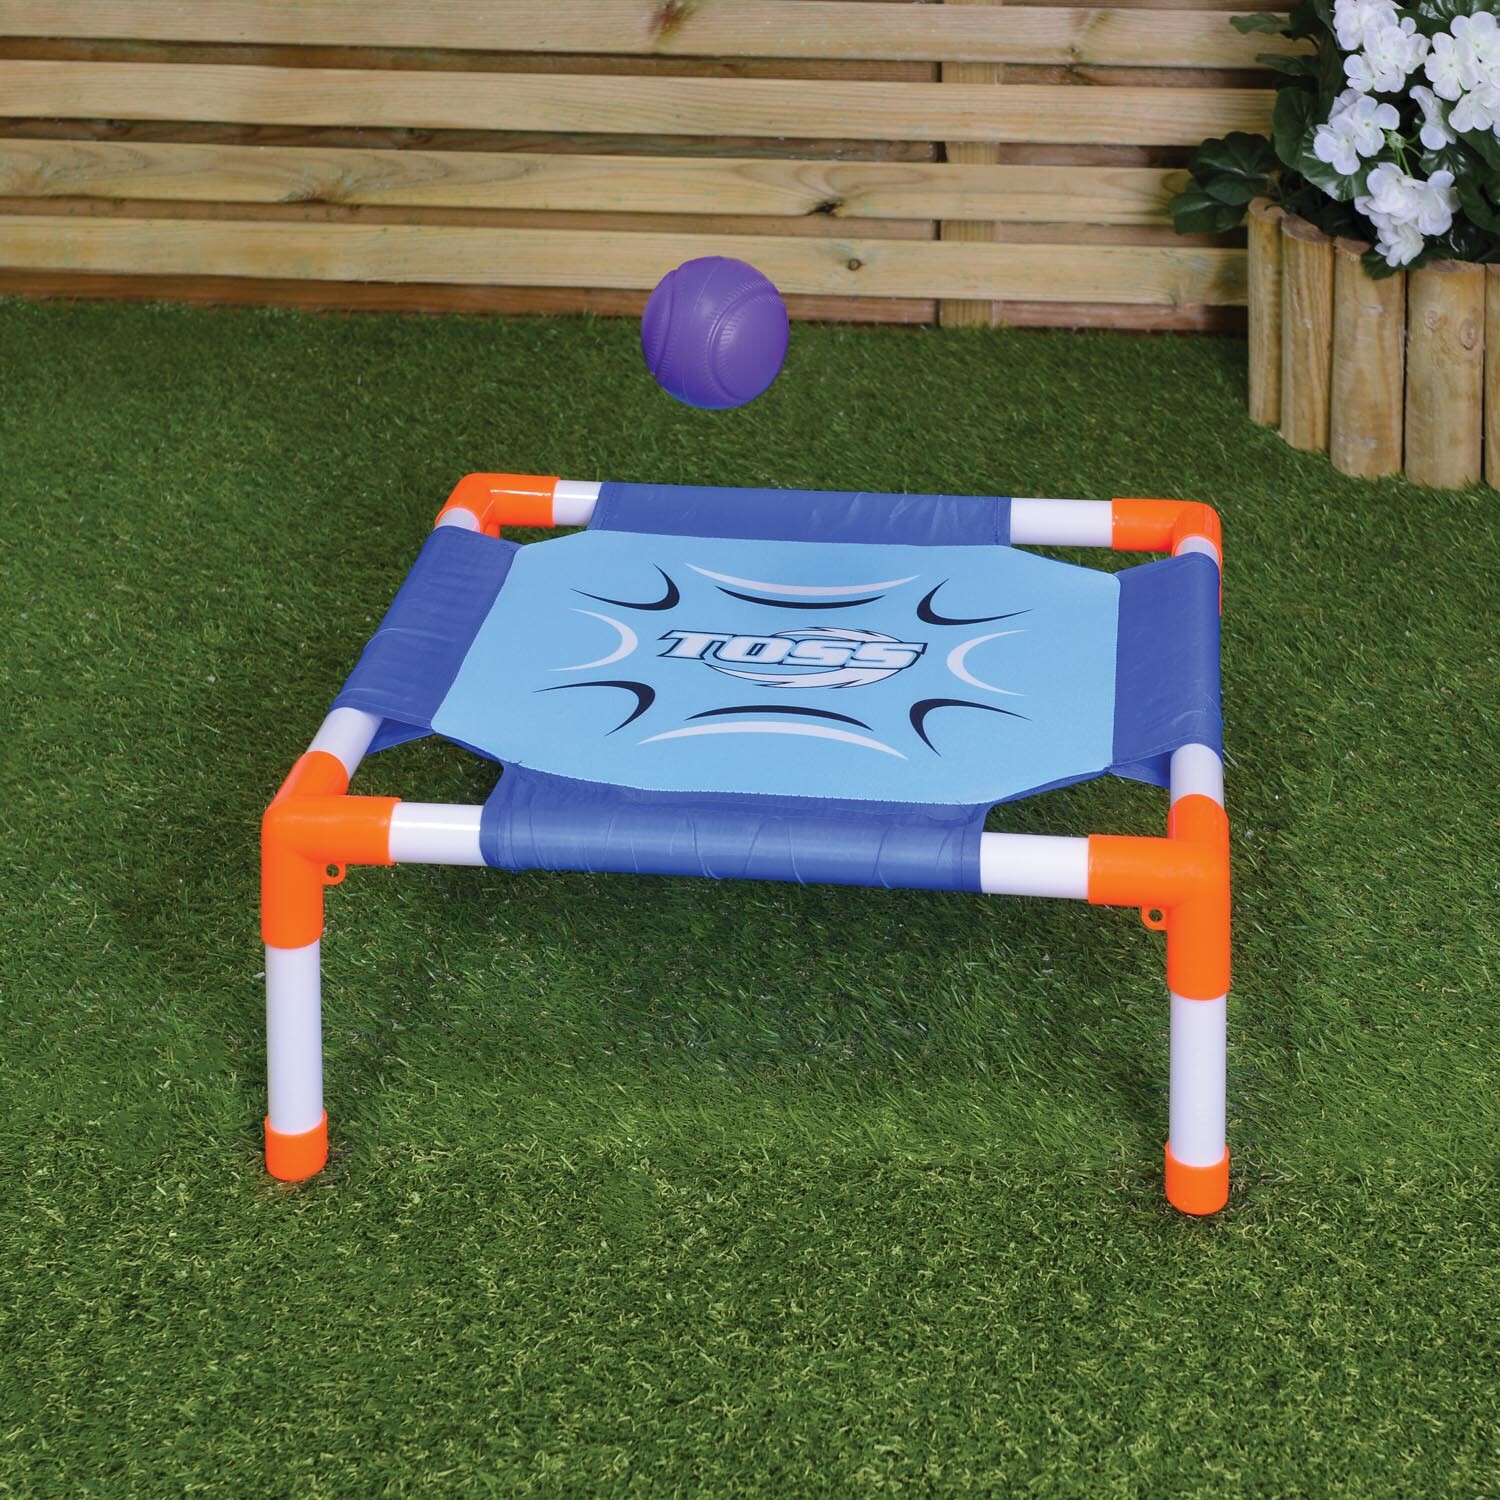 Earth Bags Toss Play Set - Blue Image 7